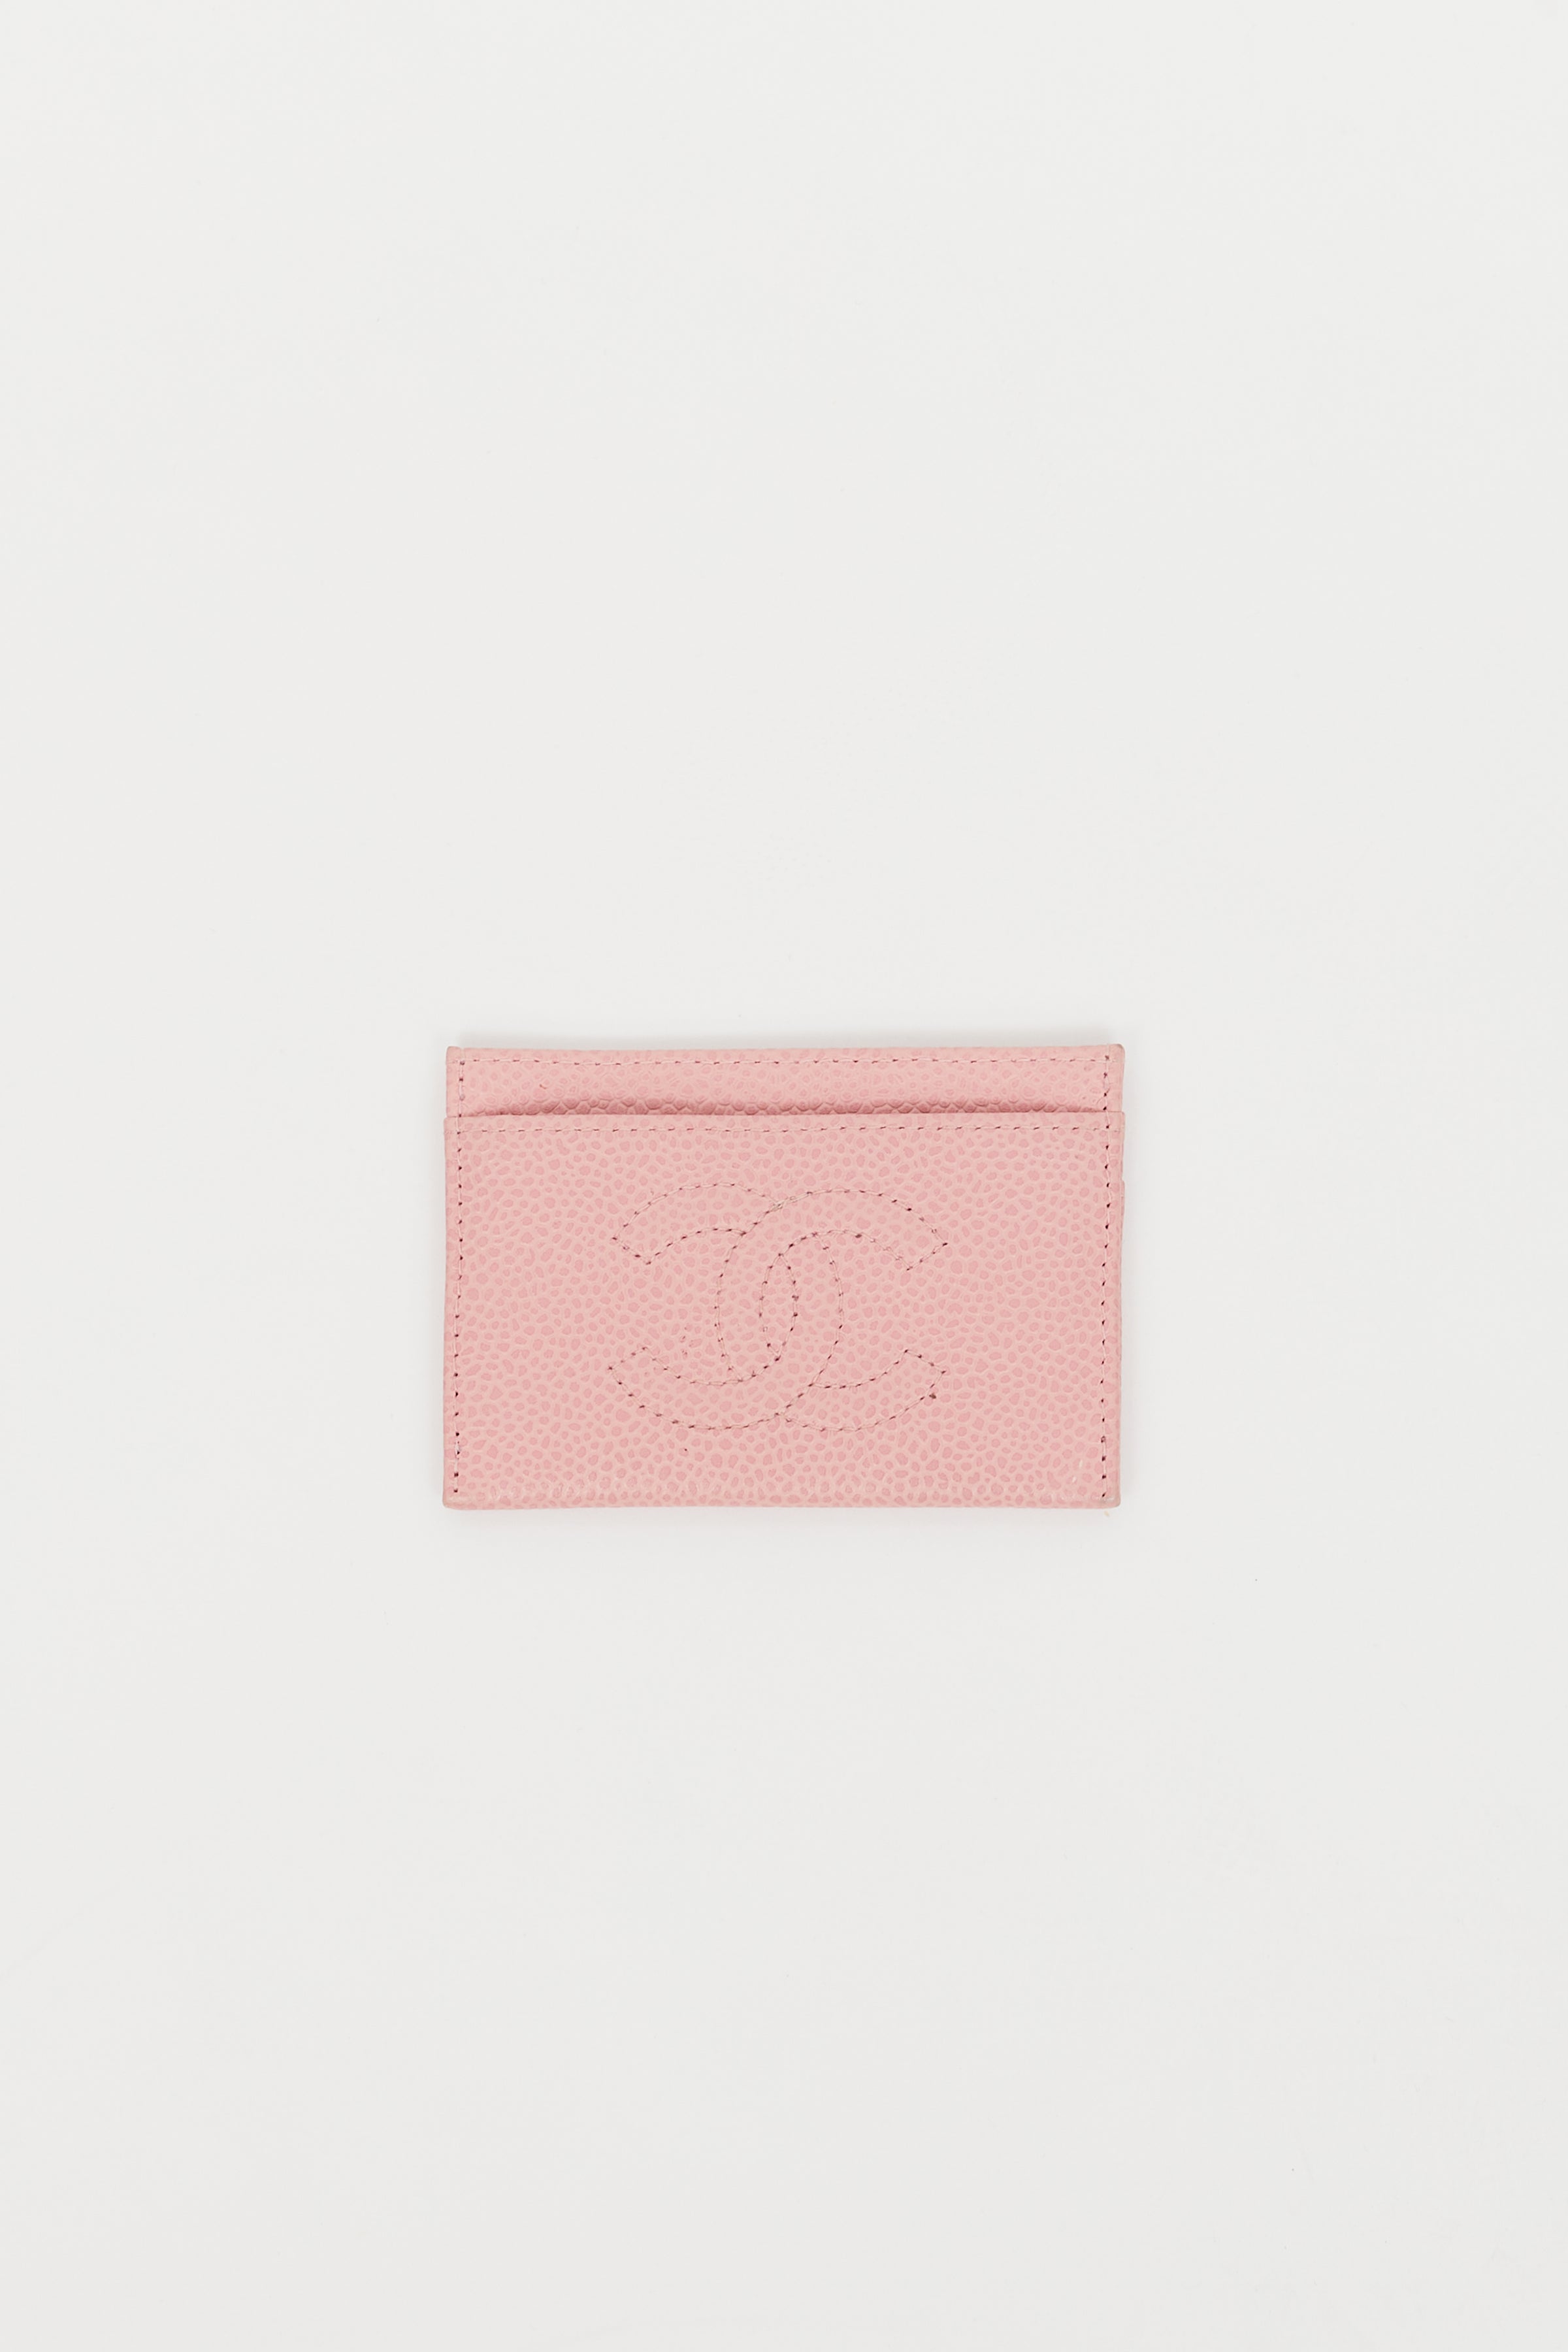 Chanel // 2004 Pink Pebbled Leather CC Cardholder – VSP Consignment